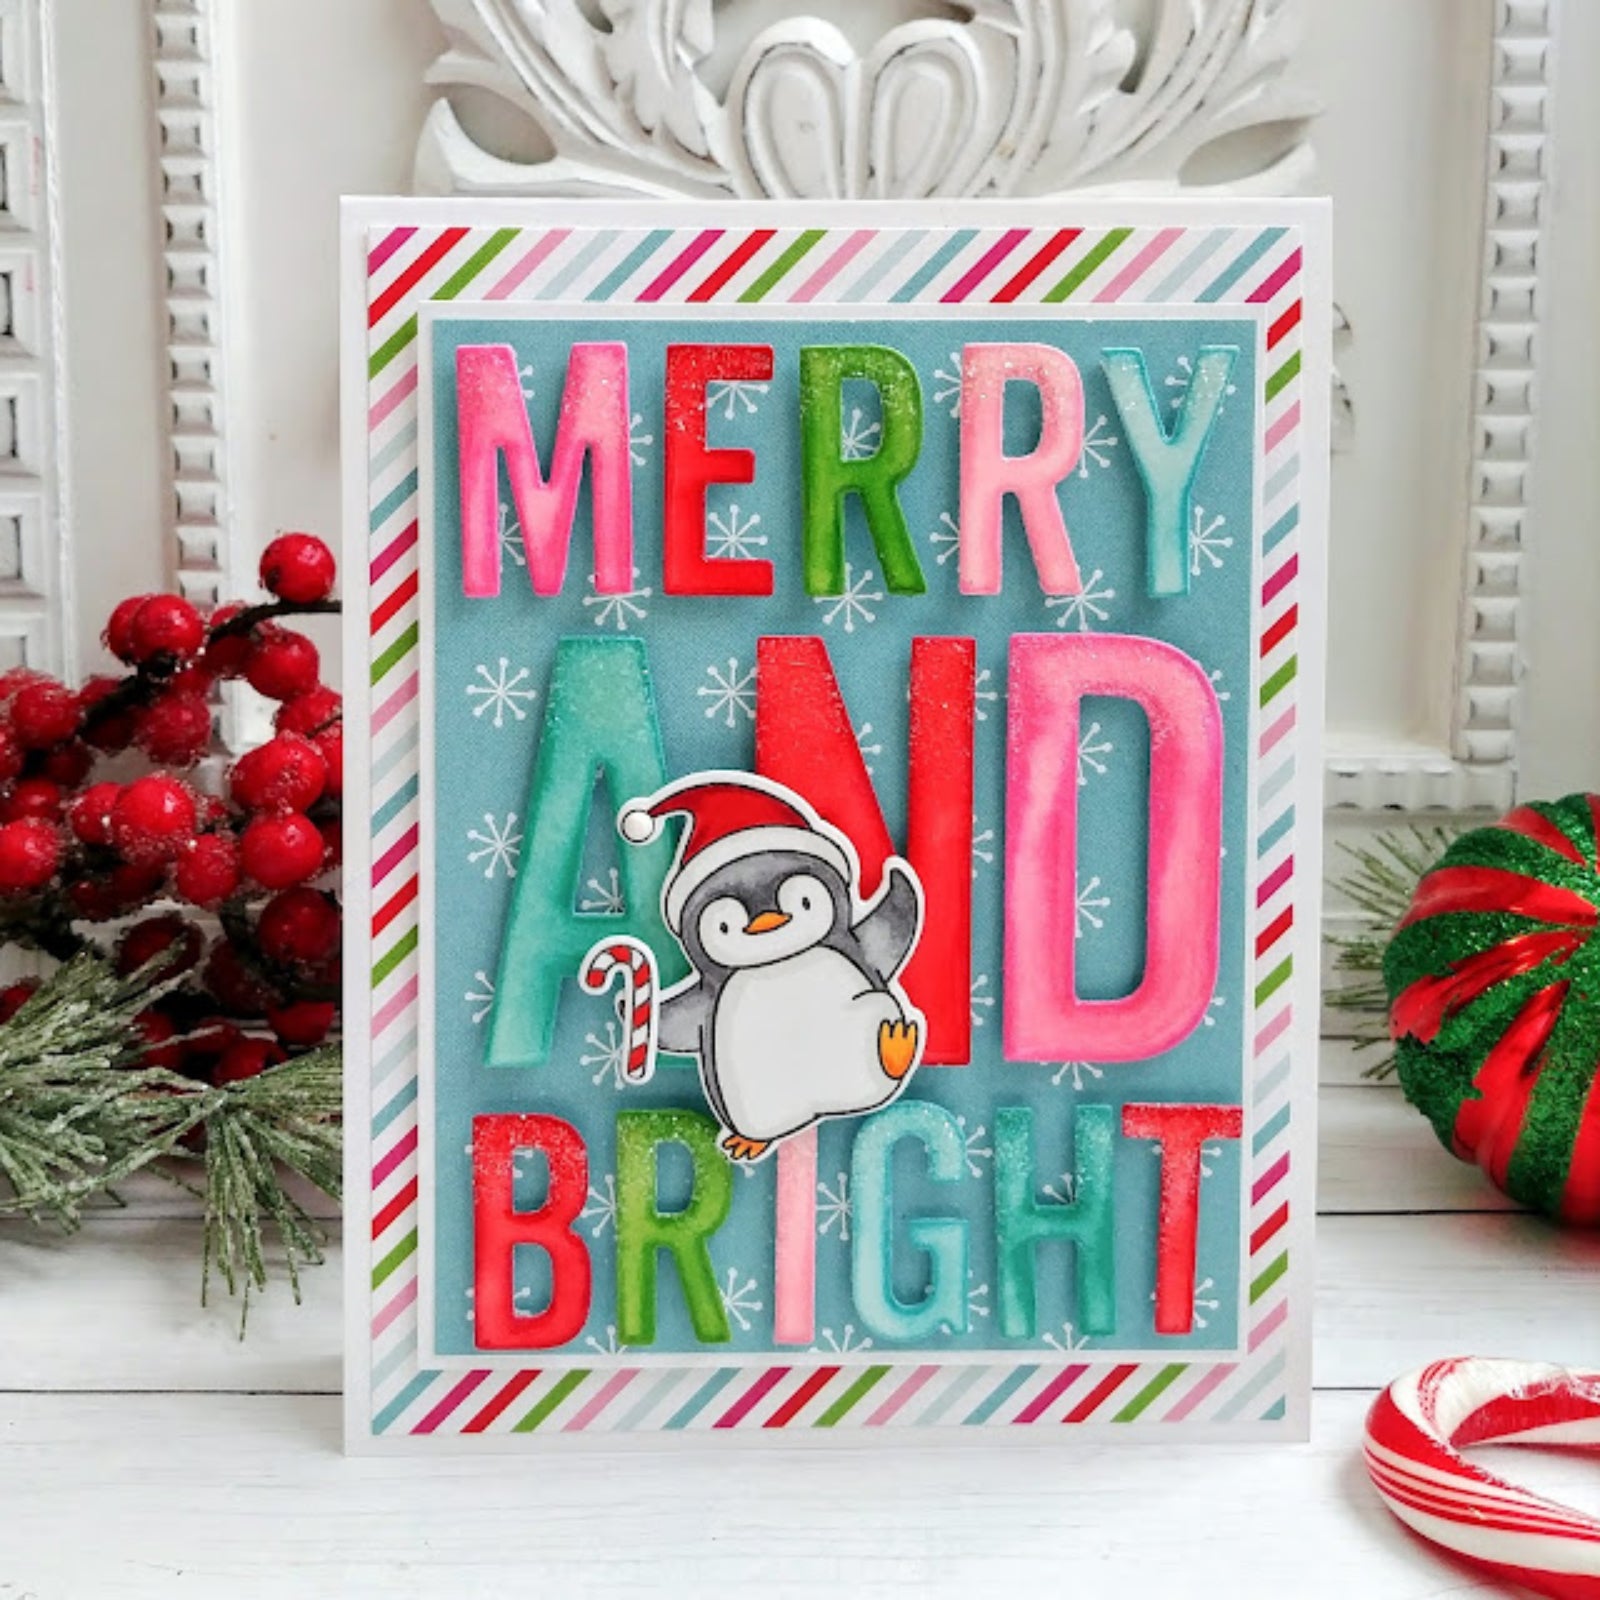 Merry And Bright Large Sentiment Words Cutting & Embossing Die